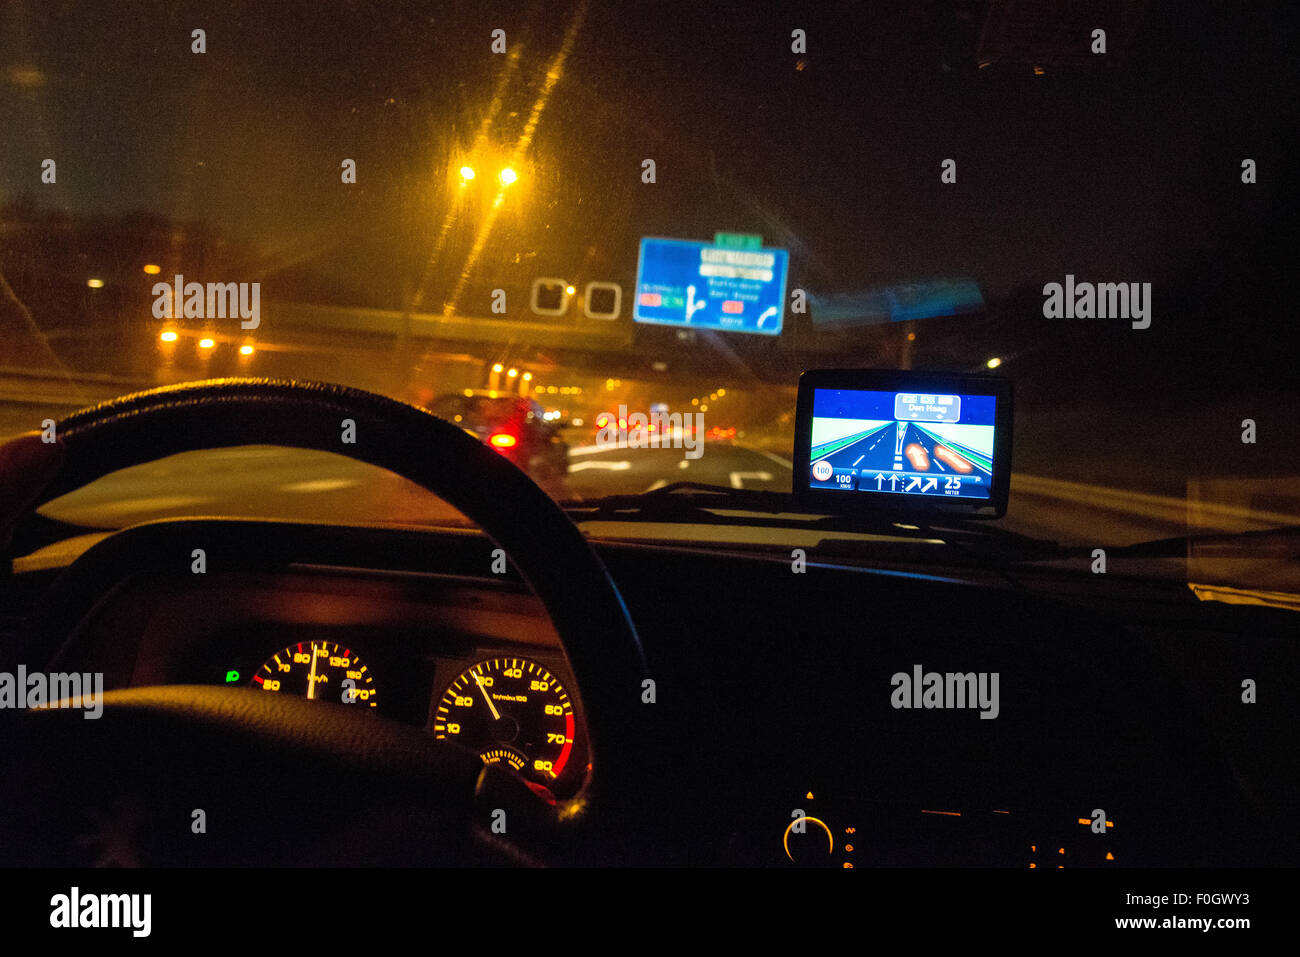 gps or navigator in car by night Stock Photo